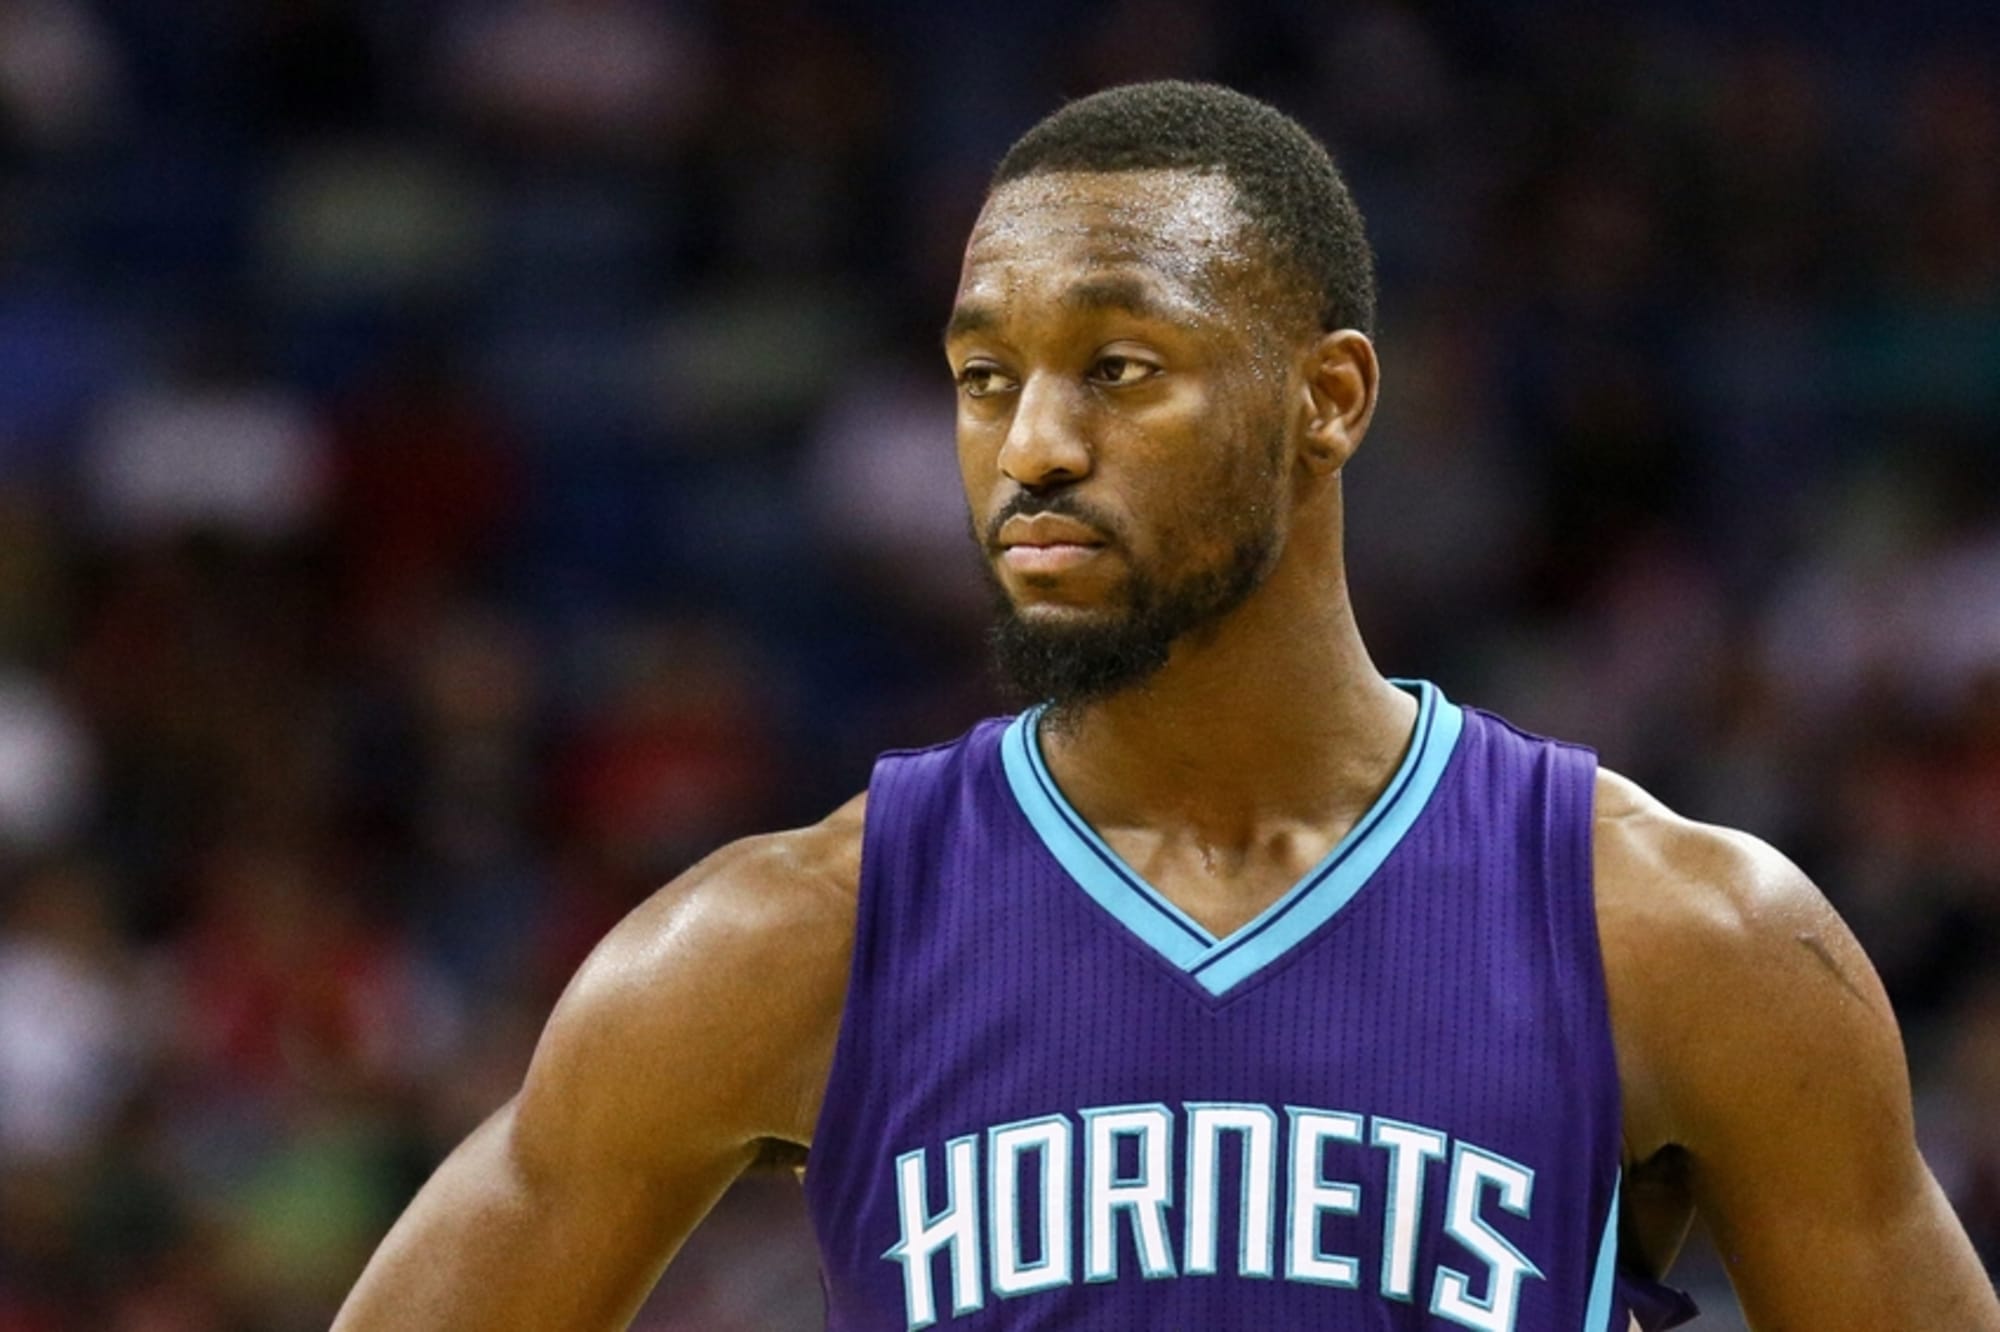 Charlotte Hornets: Kemba Walker named to the NBA All-Star Game